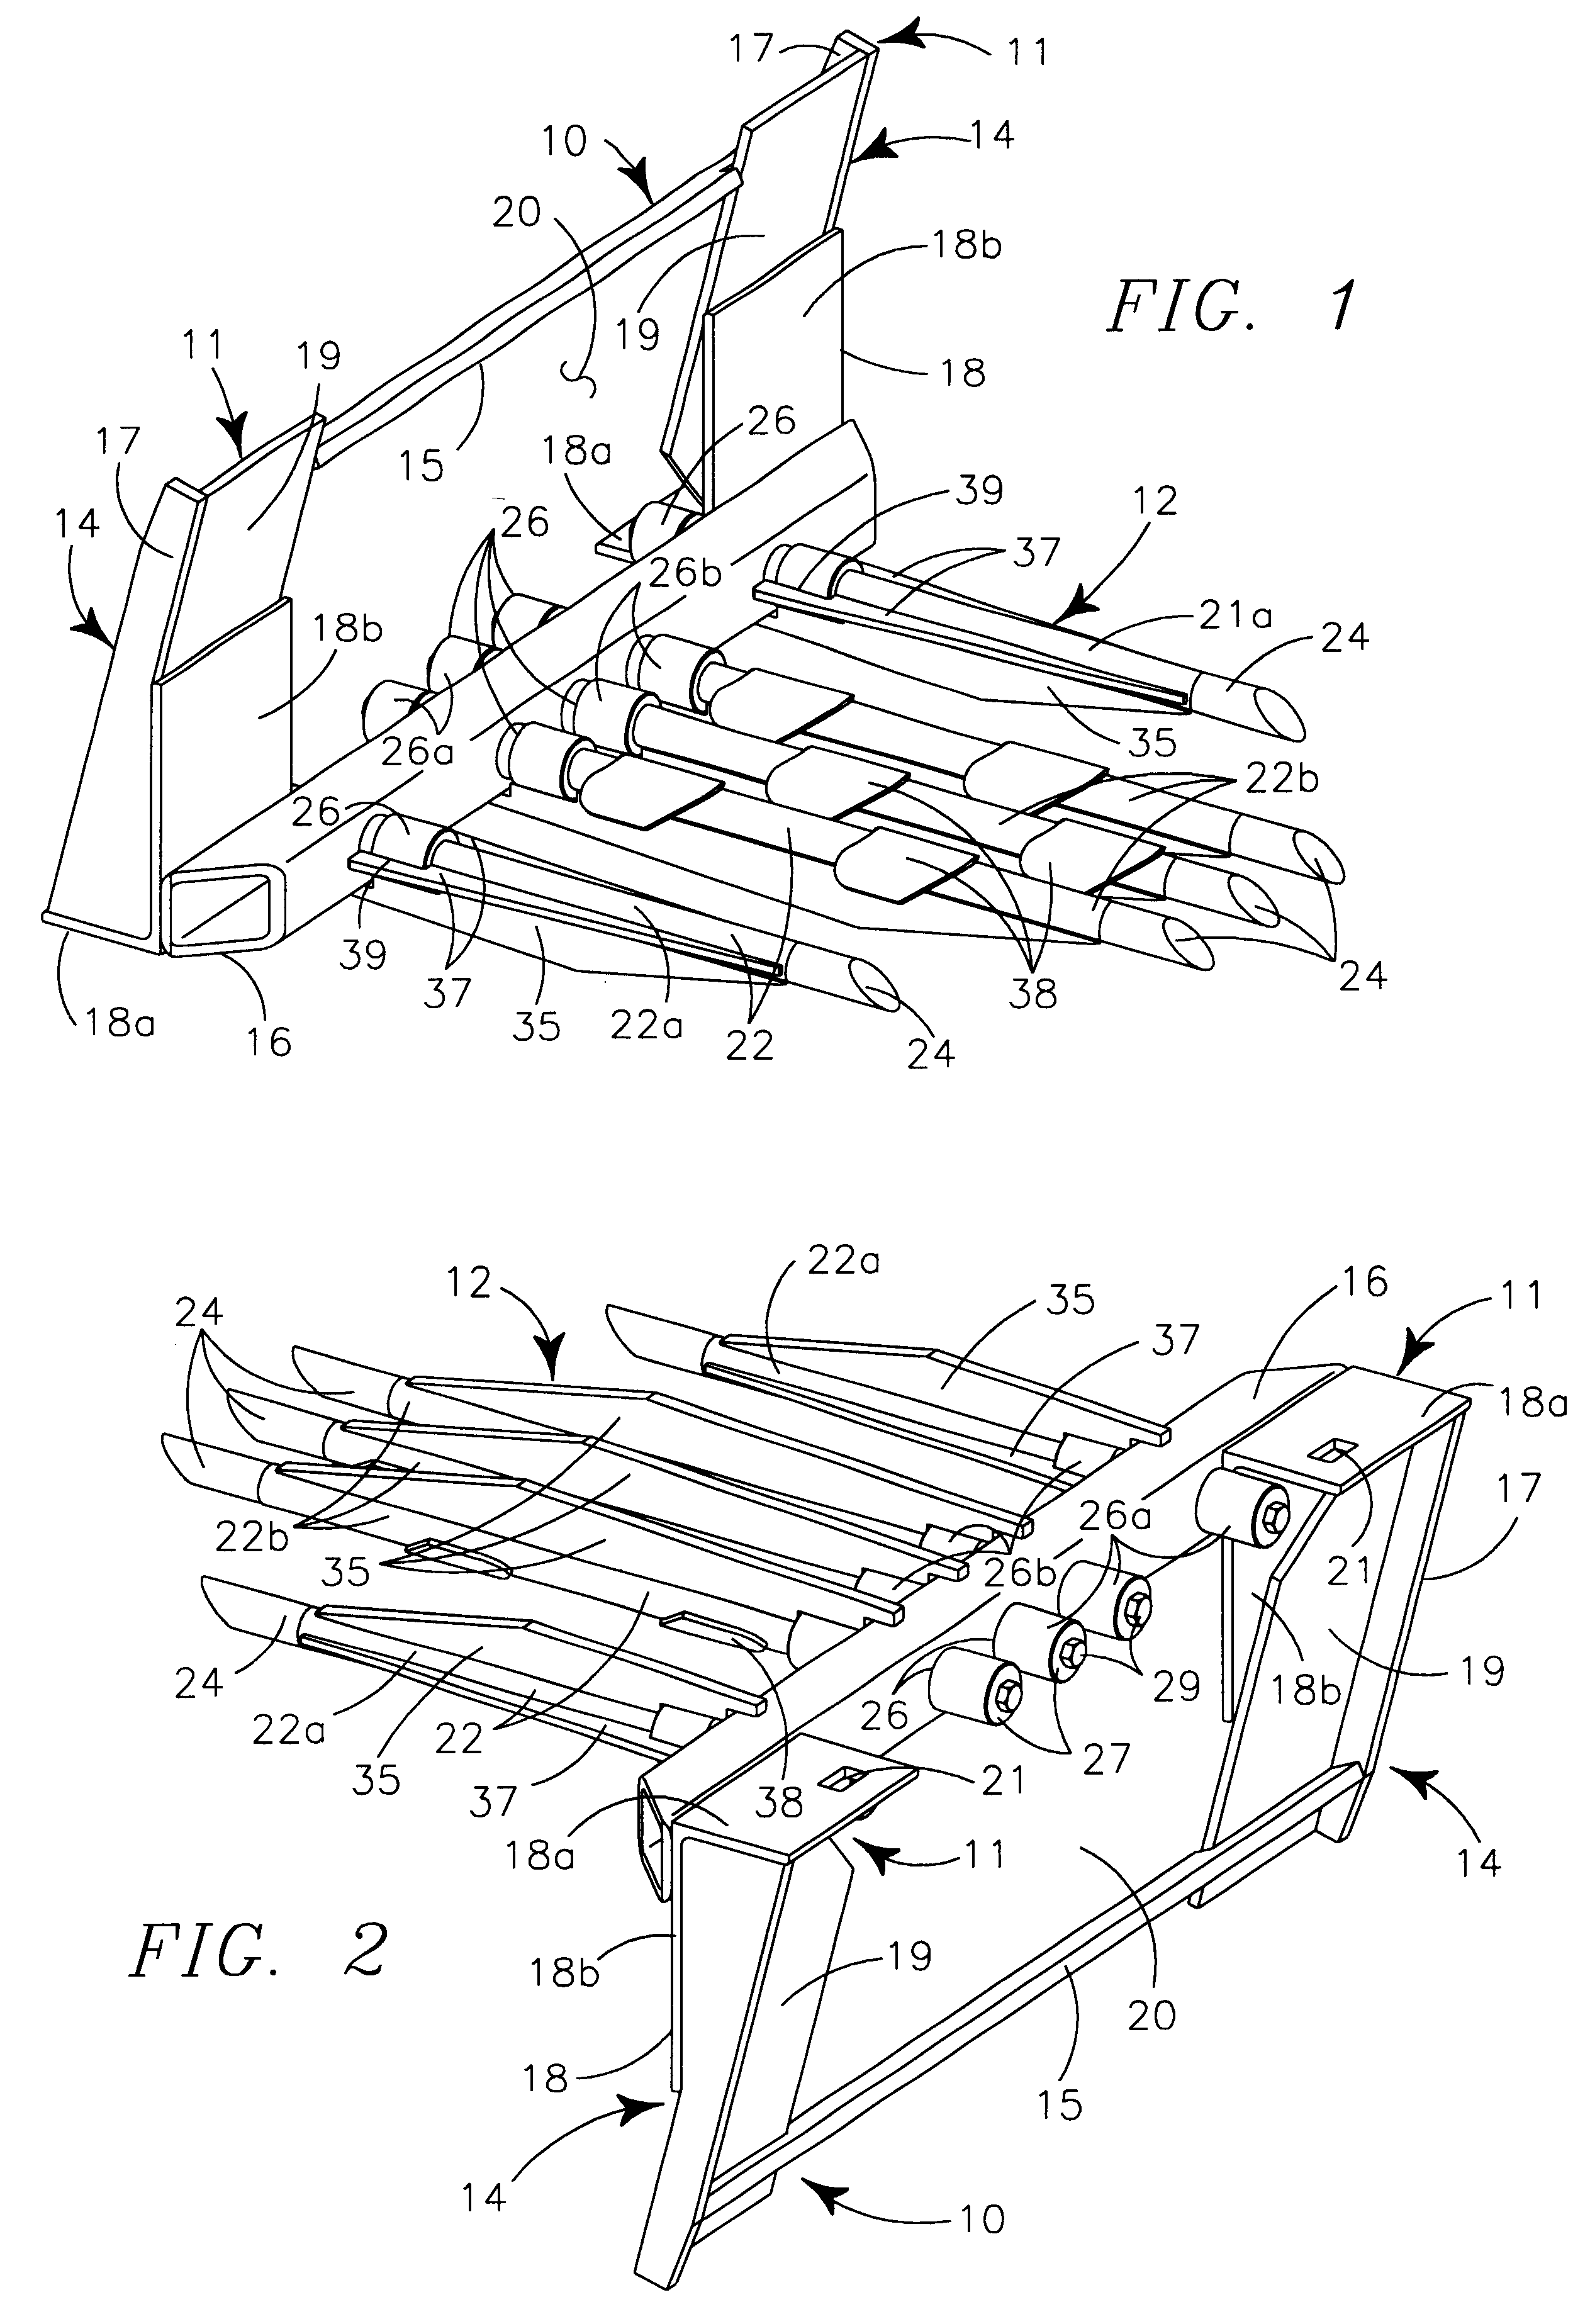 Tine structure for bare root tree and stump extracting tool